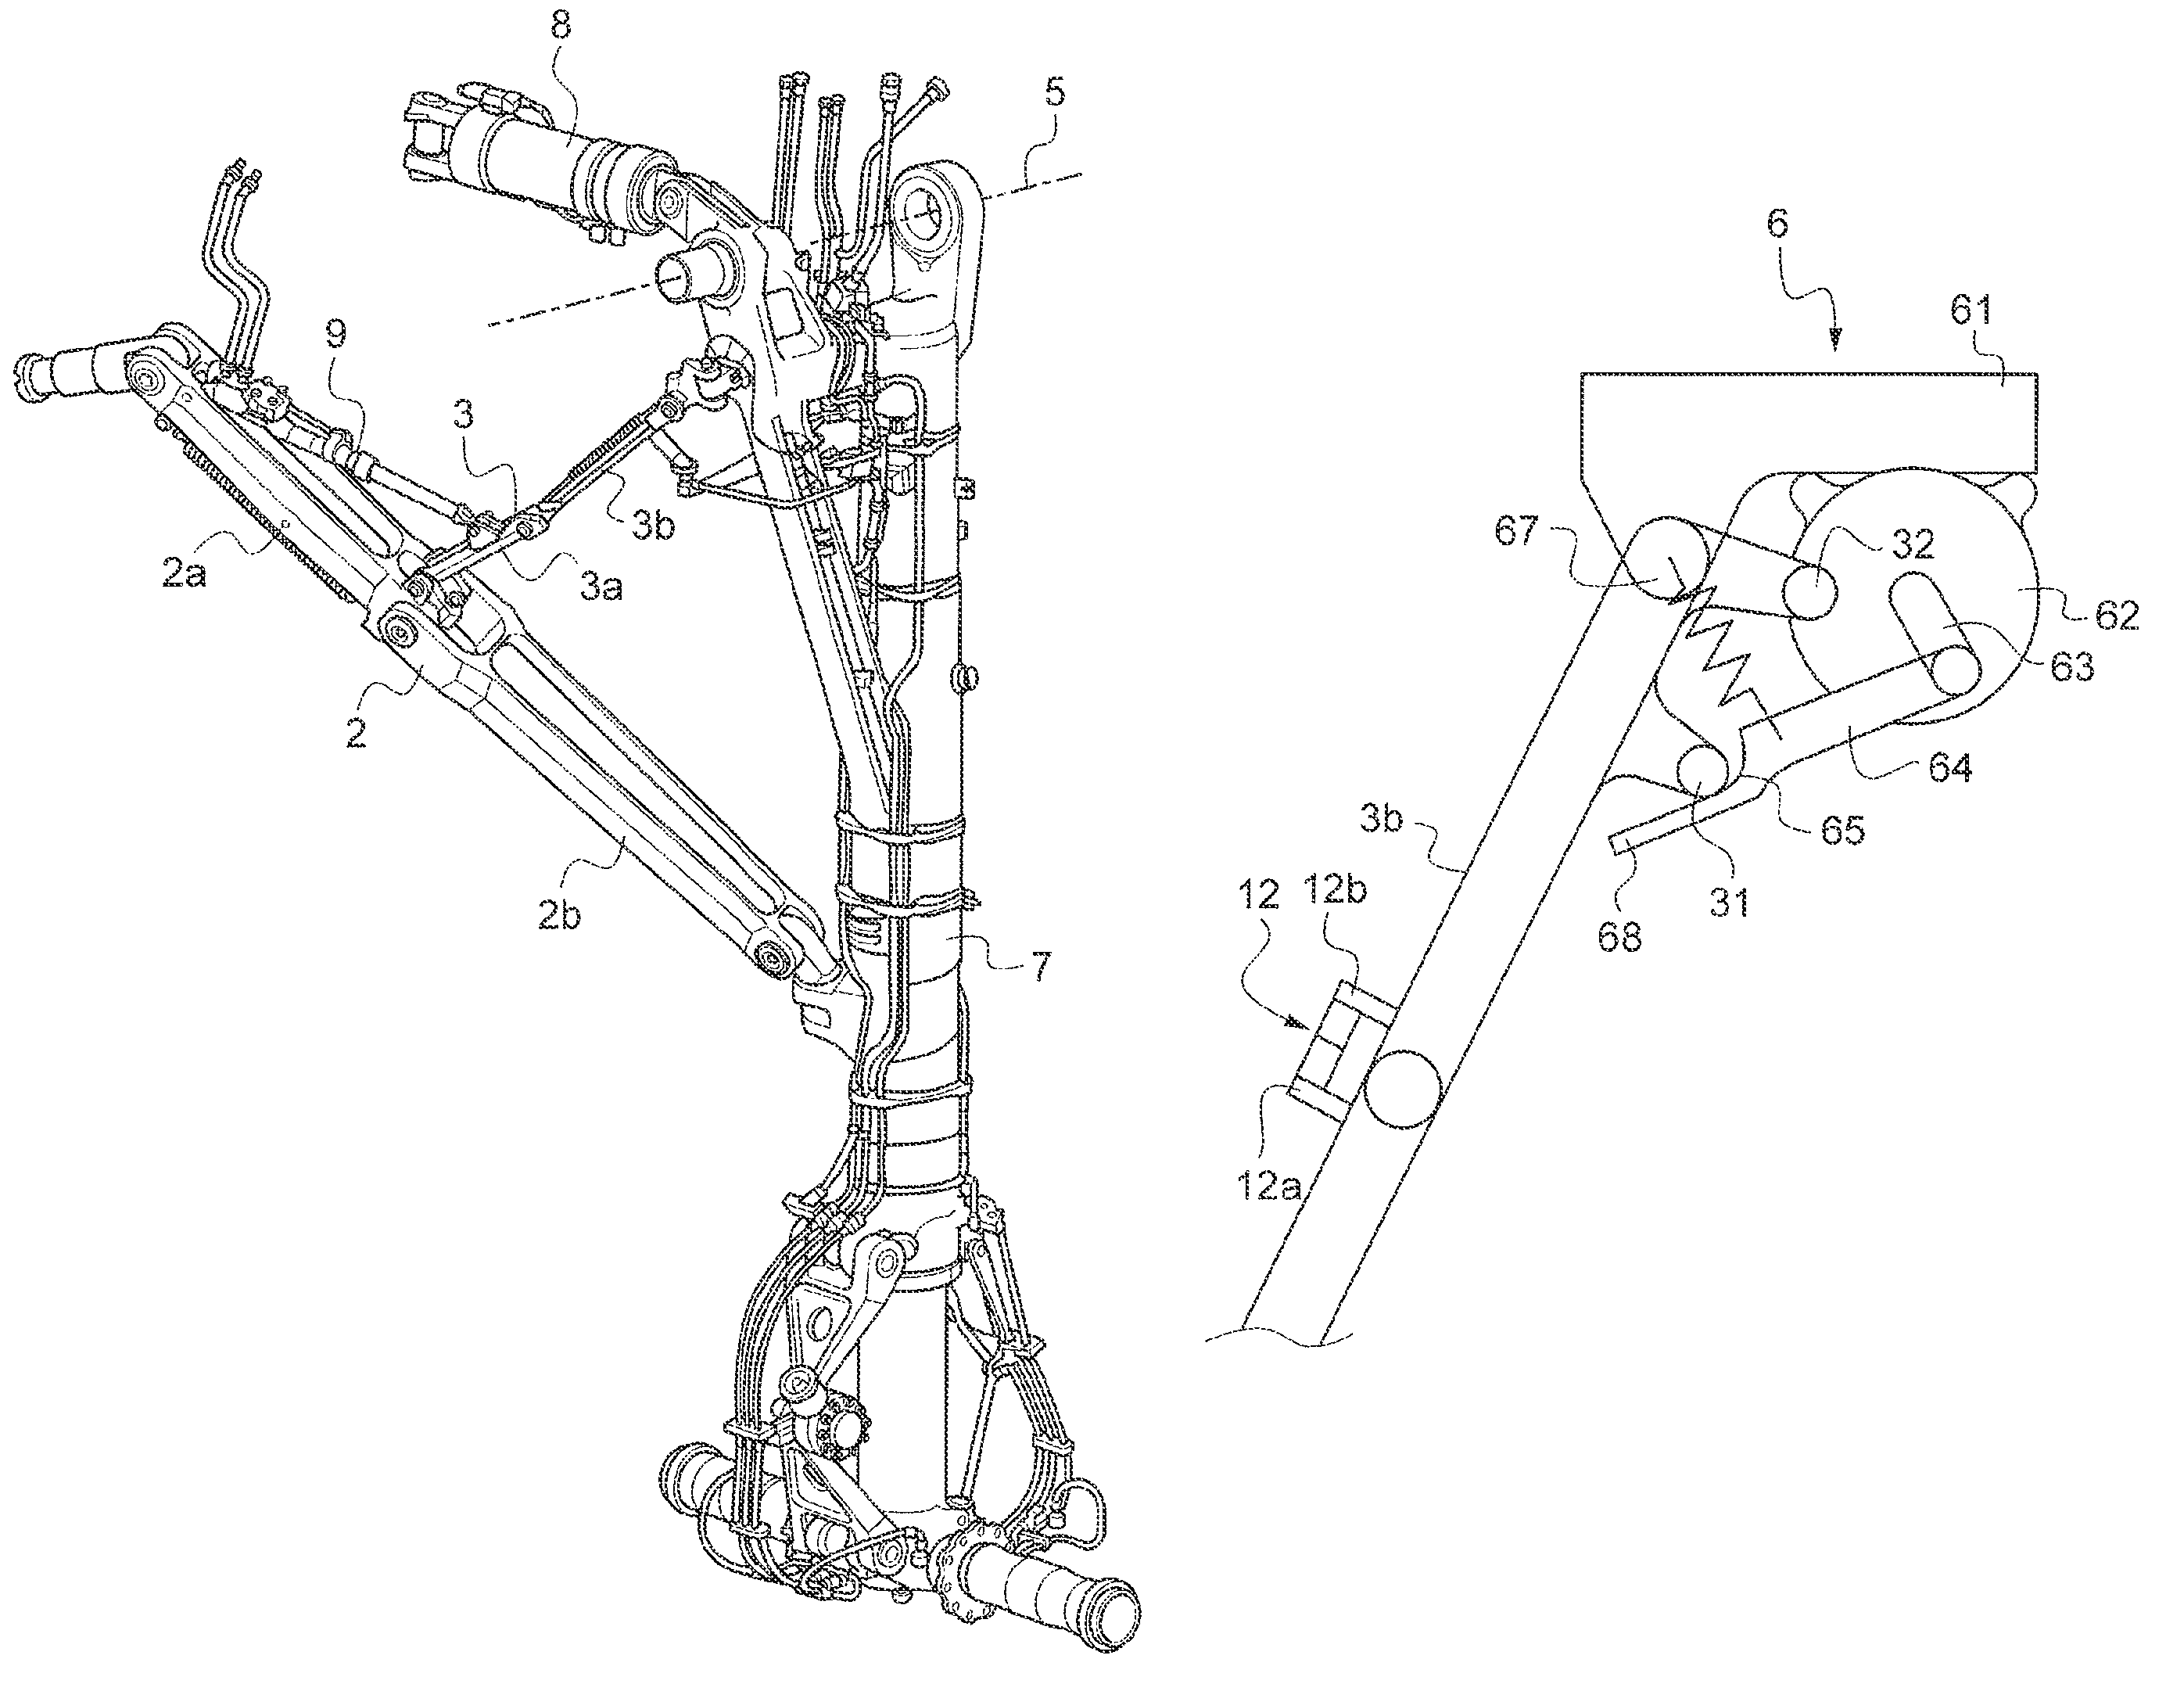 Device for unlocking an undercarriage in a deployed position, and an undercarriage fitted with such a device